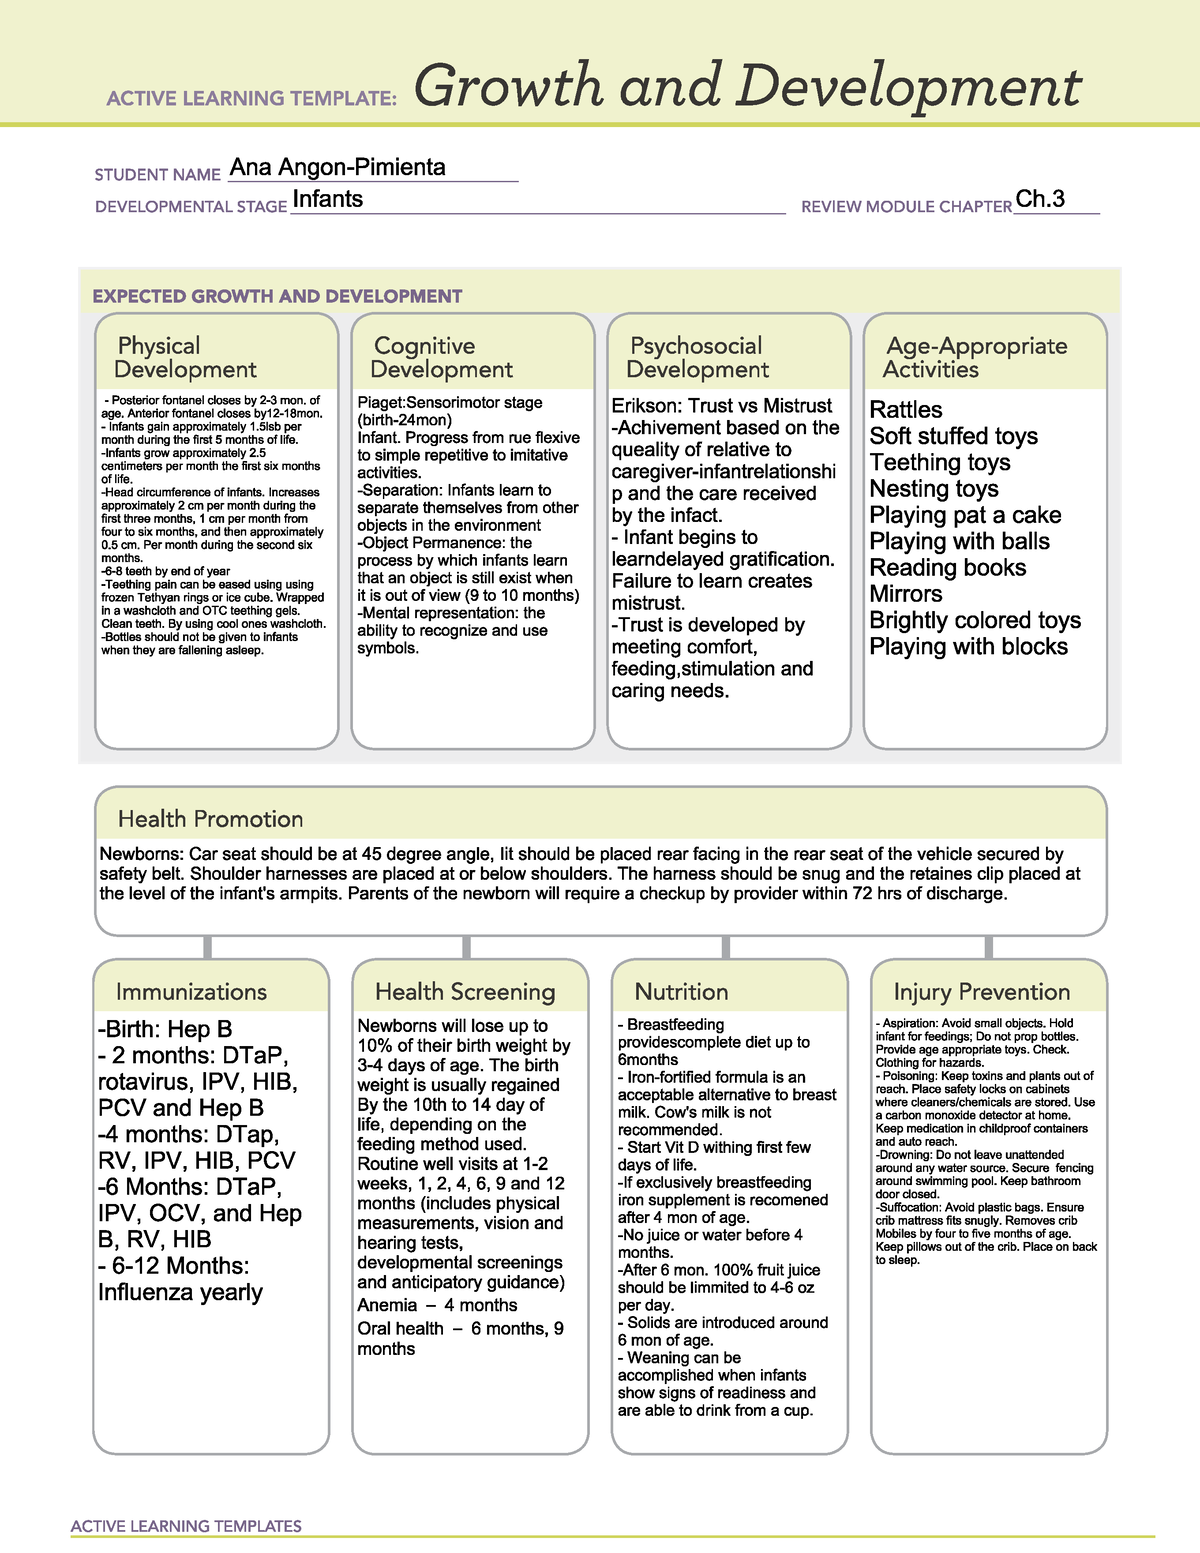 ATI Growth and Development Active Learning Template HandoutInfant